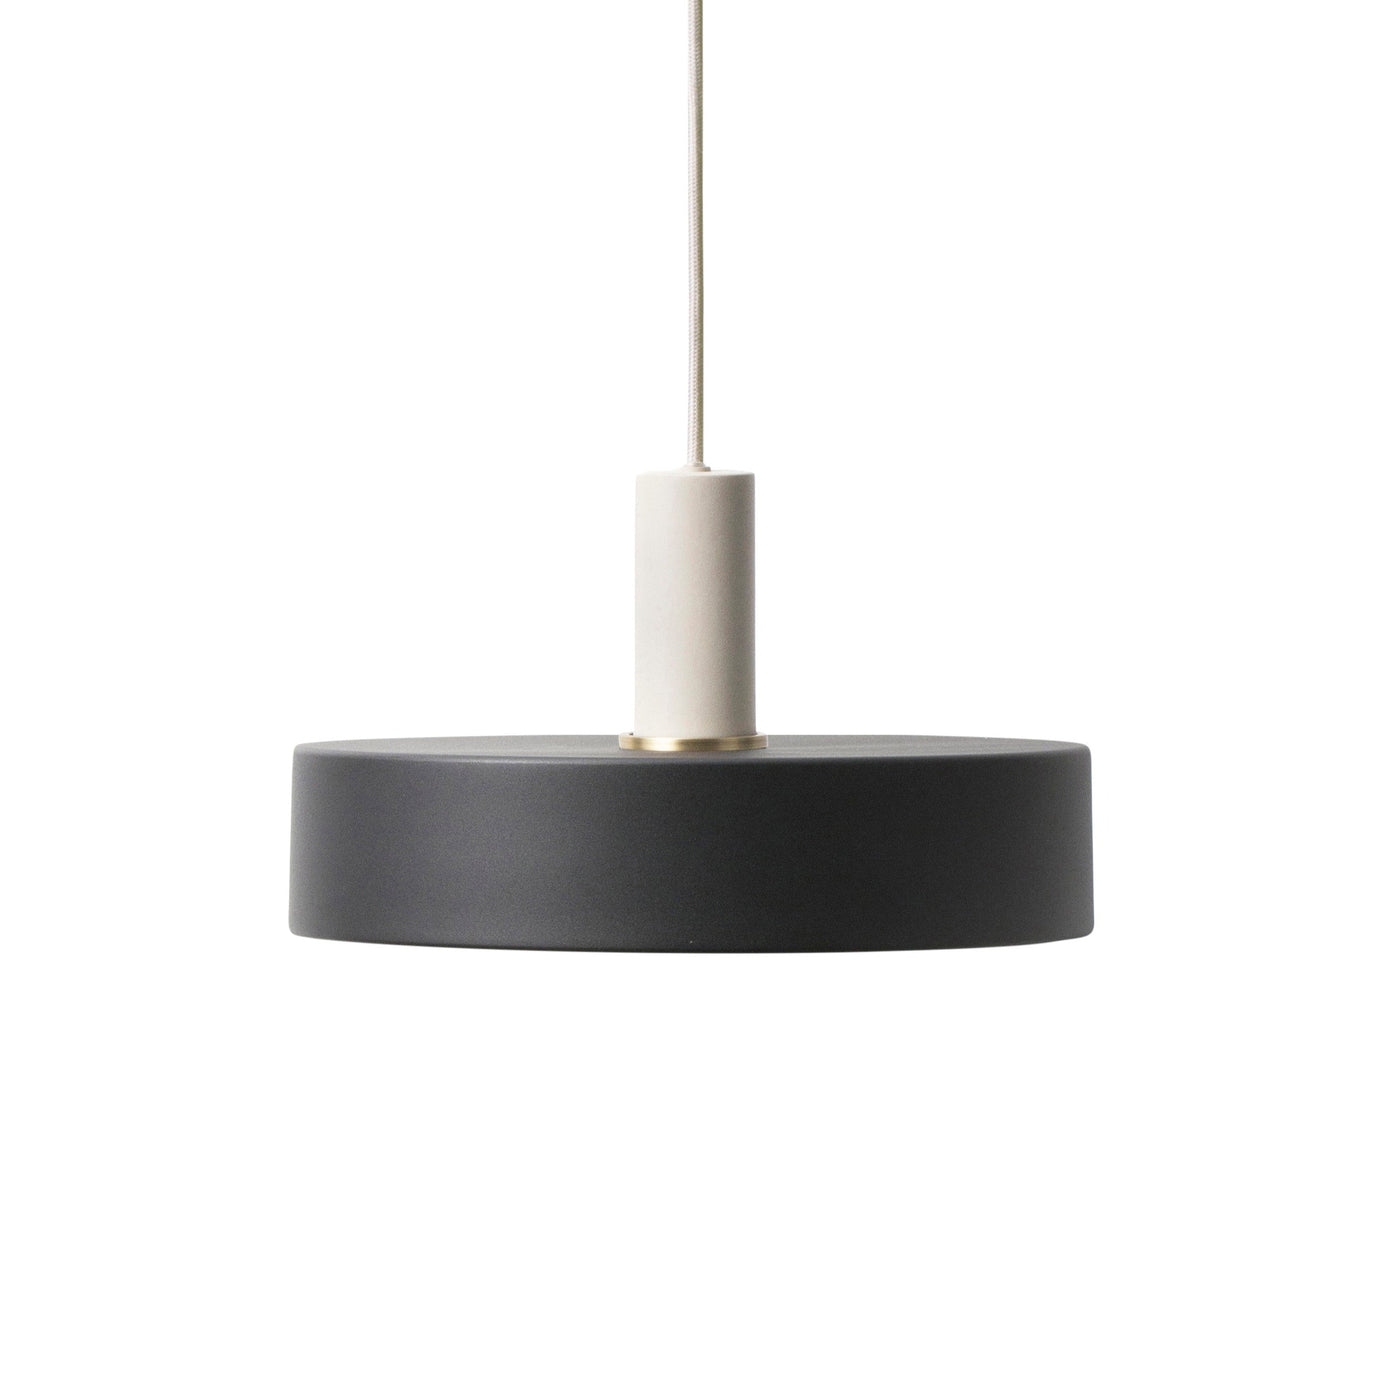 ferm LIVING Collect Lighting Record Shade. Shop online at someday designs. #colour_black